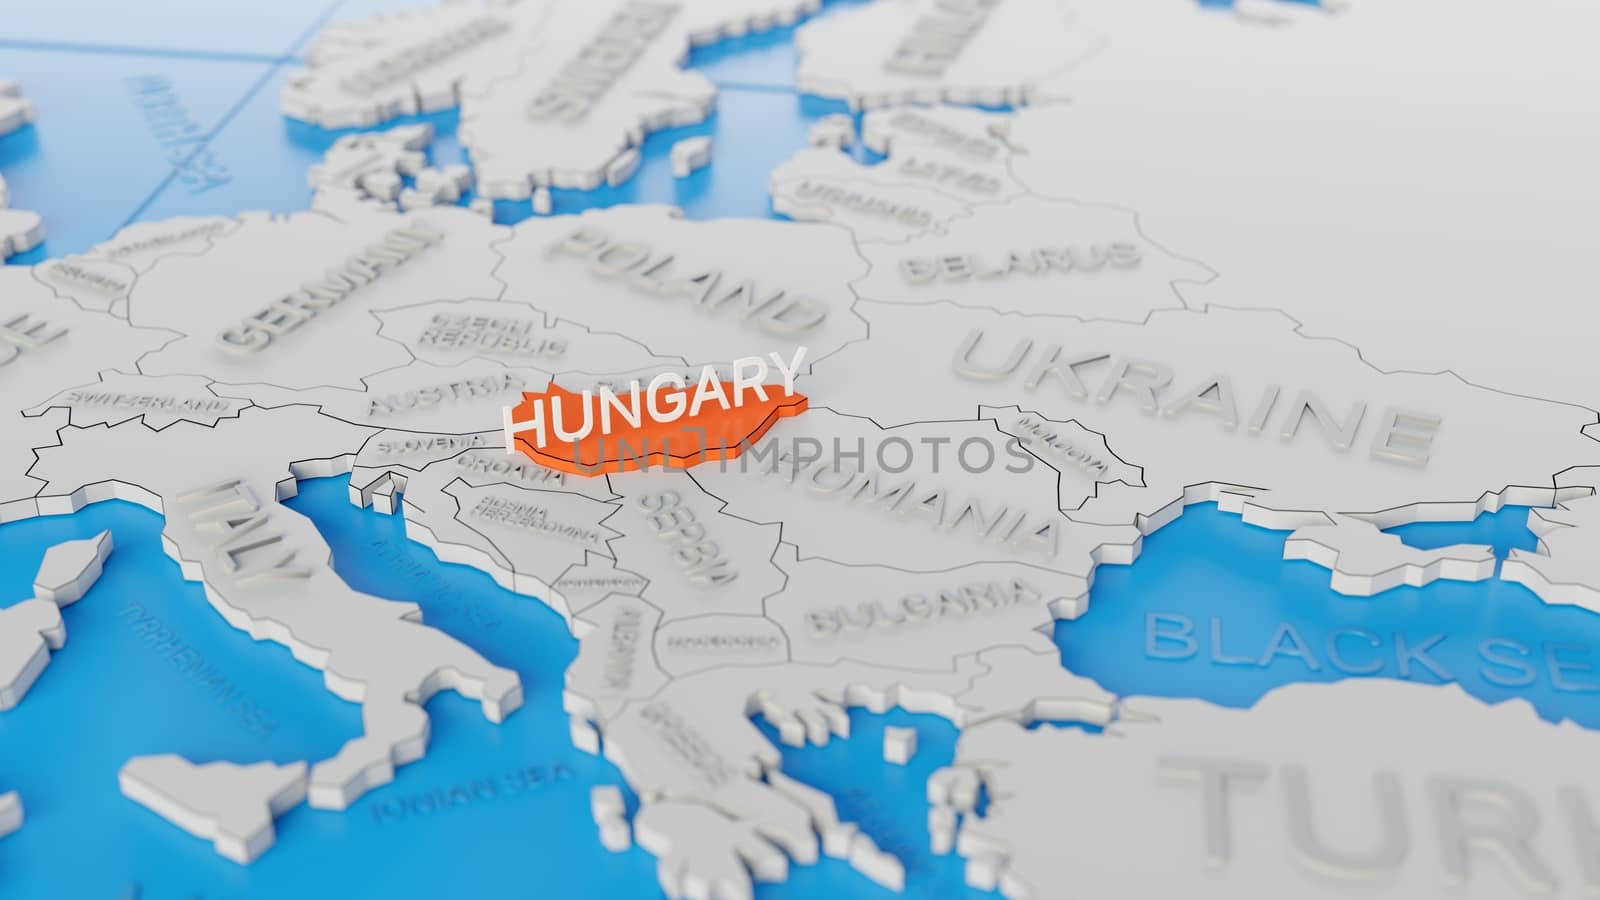 Hungary highlighted on a white simplified 3D world map. Digital 3D render.